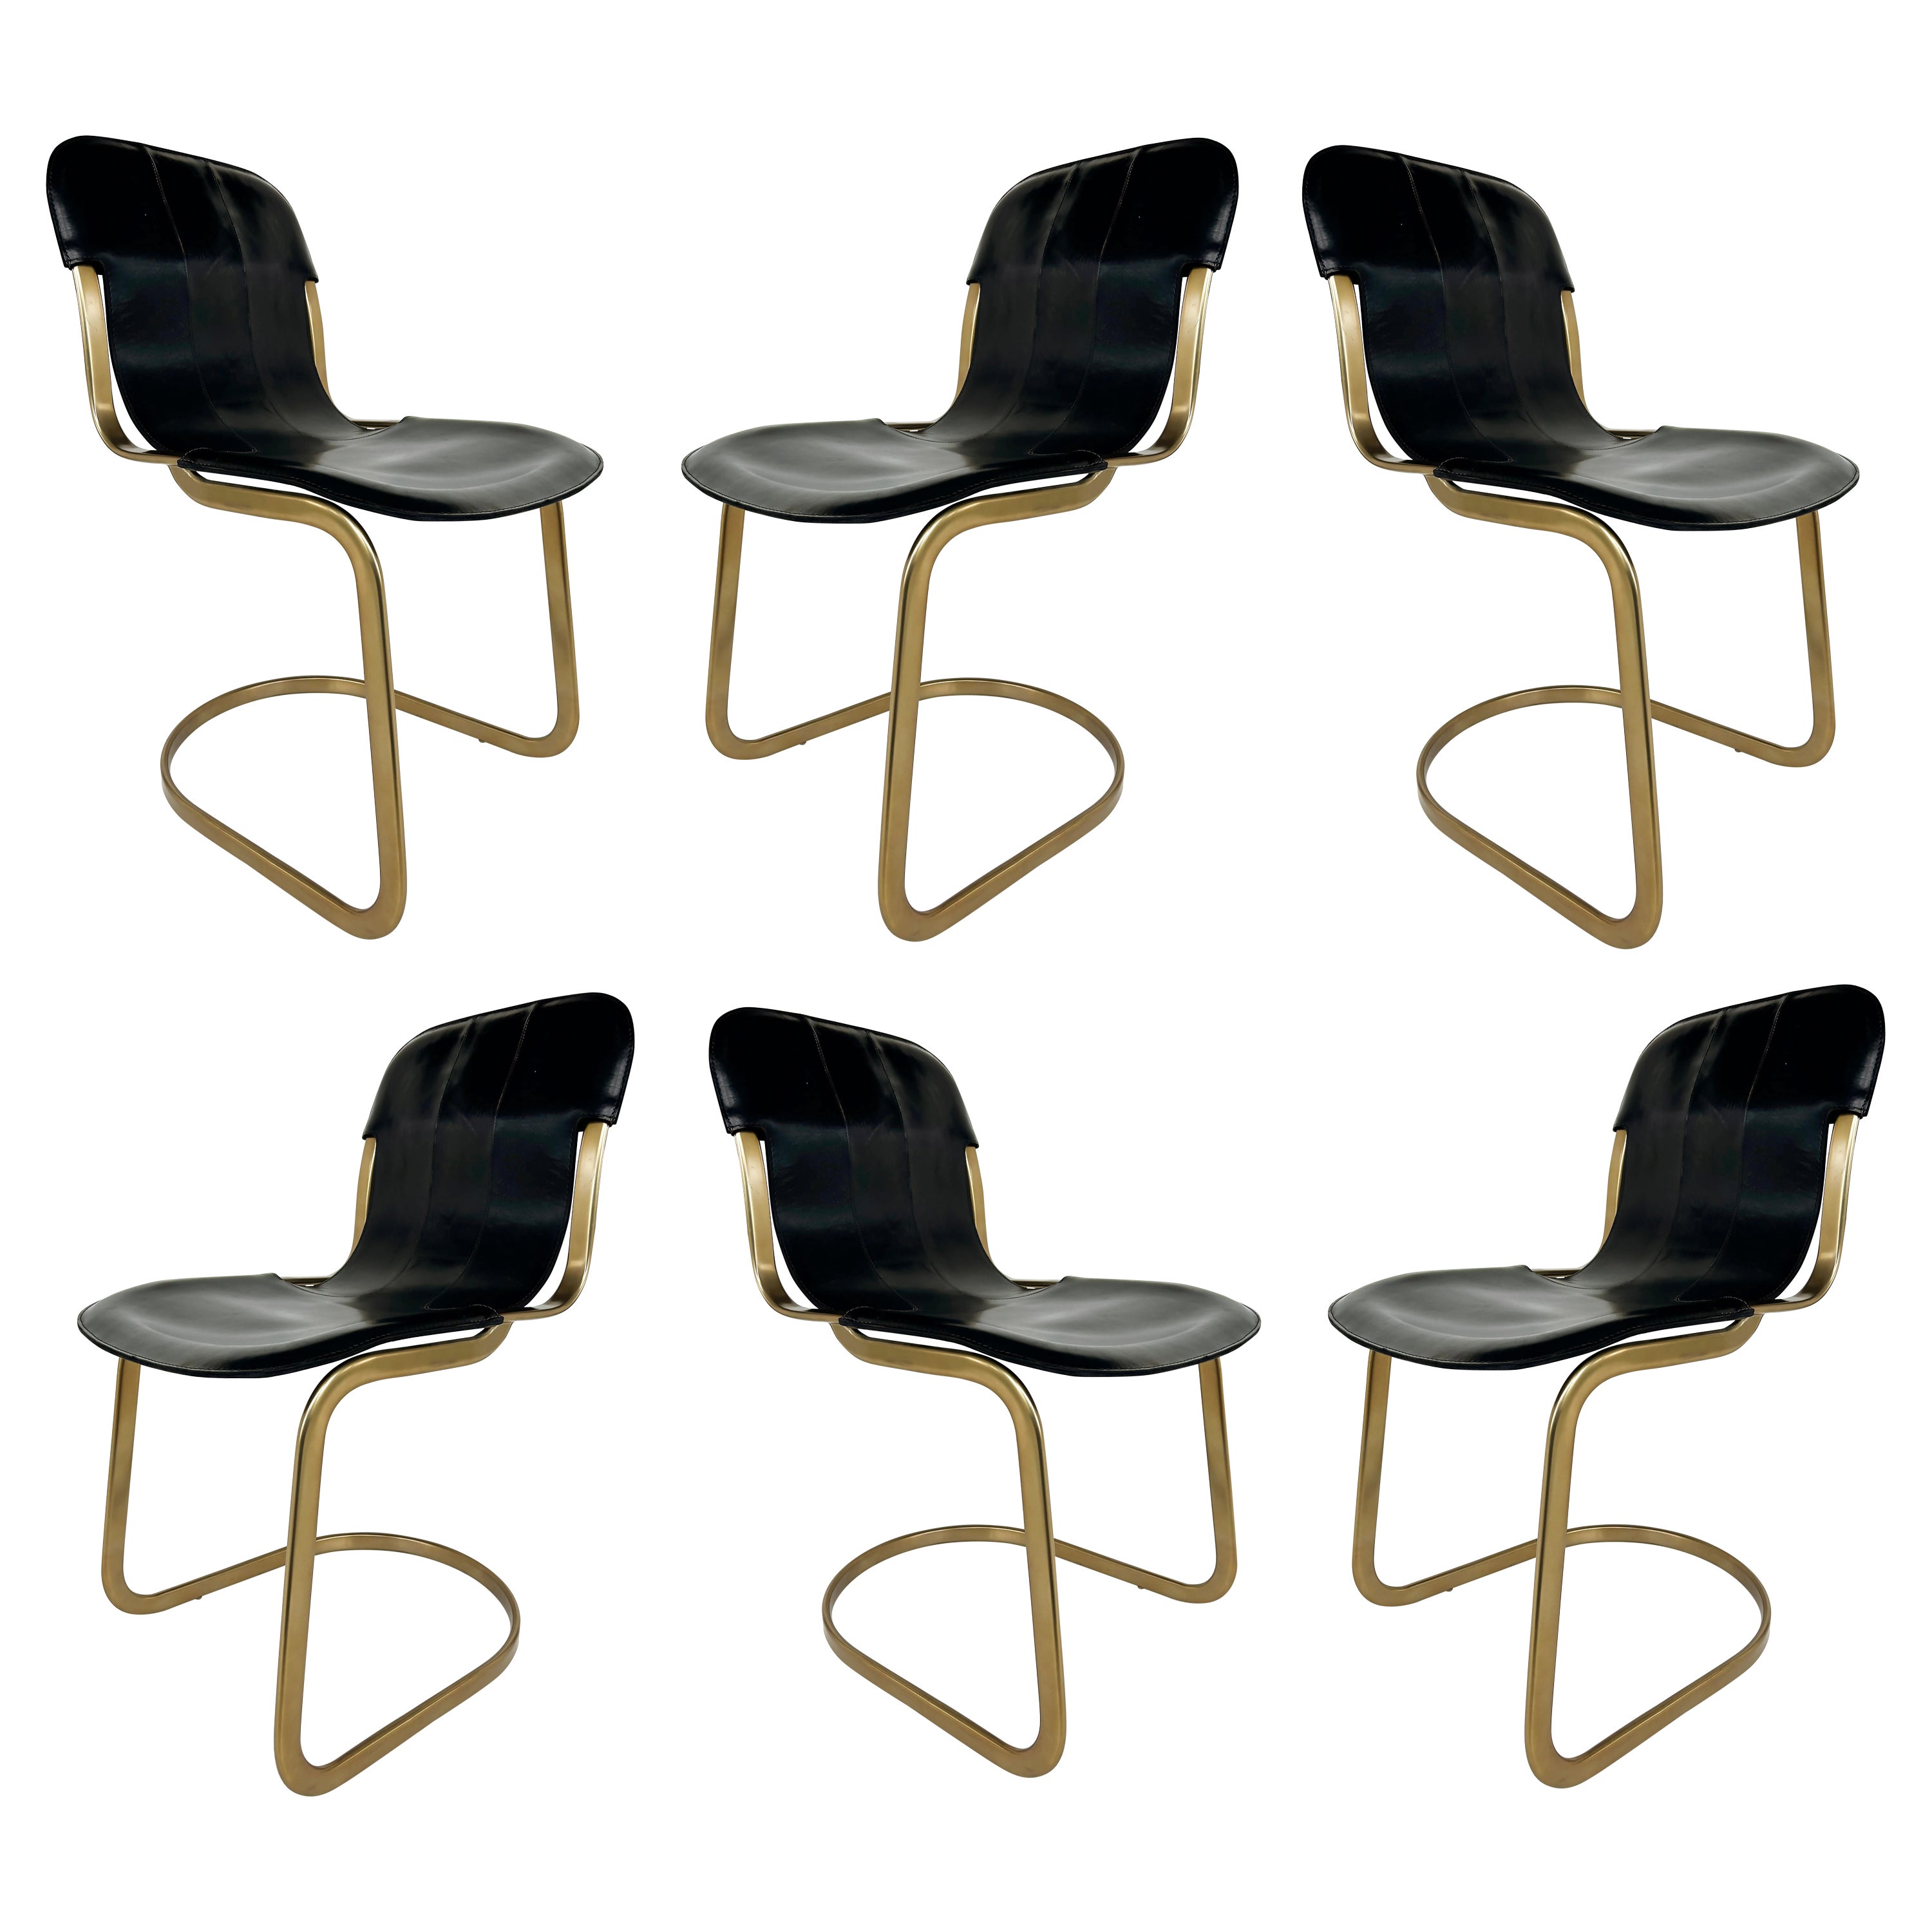 Brass Plated Leather Cantilevered Dining Chairs After Willy Rizzo, Set of 6